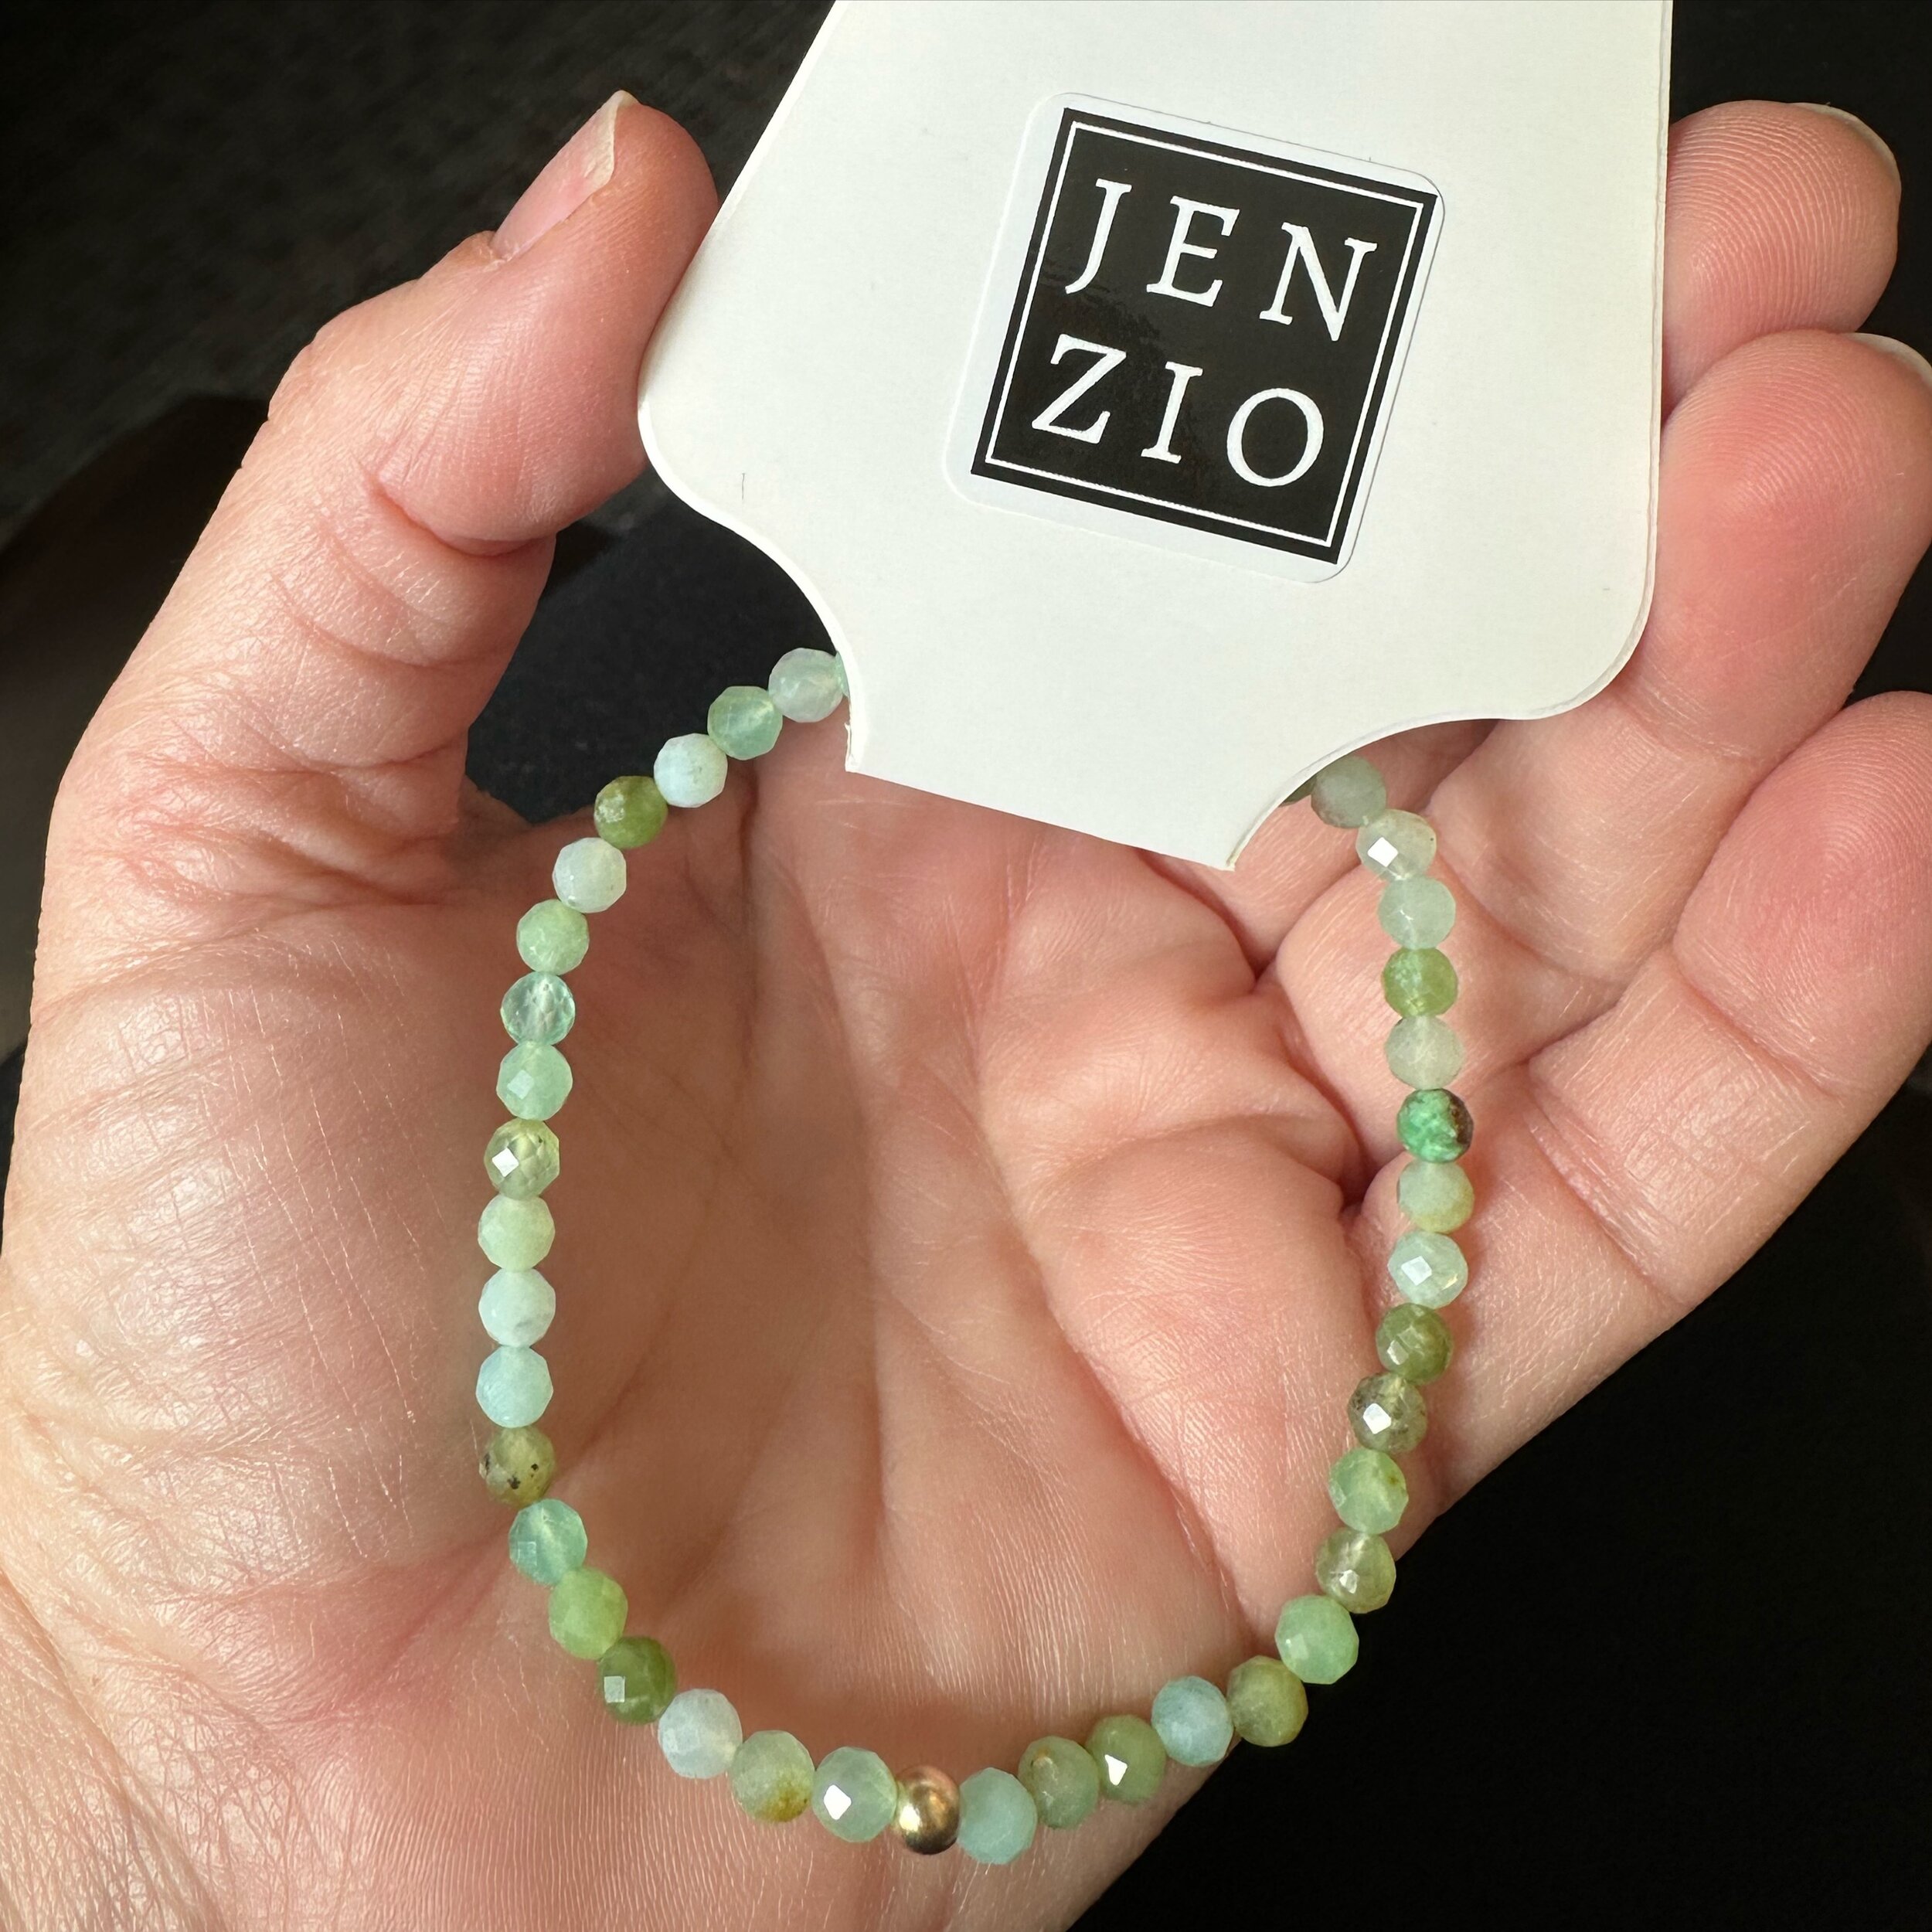 👉🏼 Jenzio Jewelry is in the works!&hellip;
.
Oh, yeah! Handmade jewelry is in full production mode getting ready for the Feb 24th Grand Opening at @paintedtreeboutiques in Reno/Sparks, Nevada!
.
Can&rsquo;t wait to show you the lineup!
.
.
.
@indri